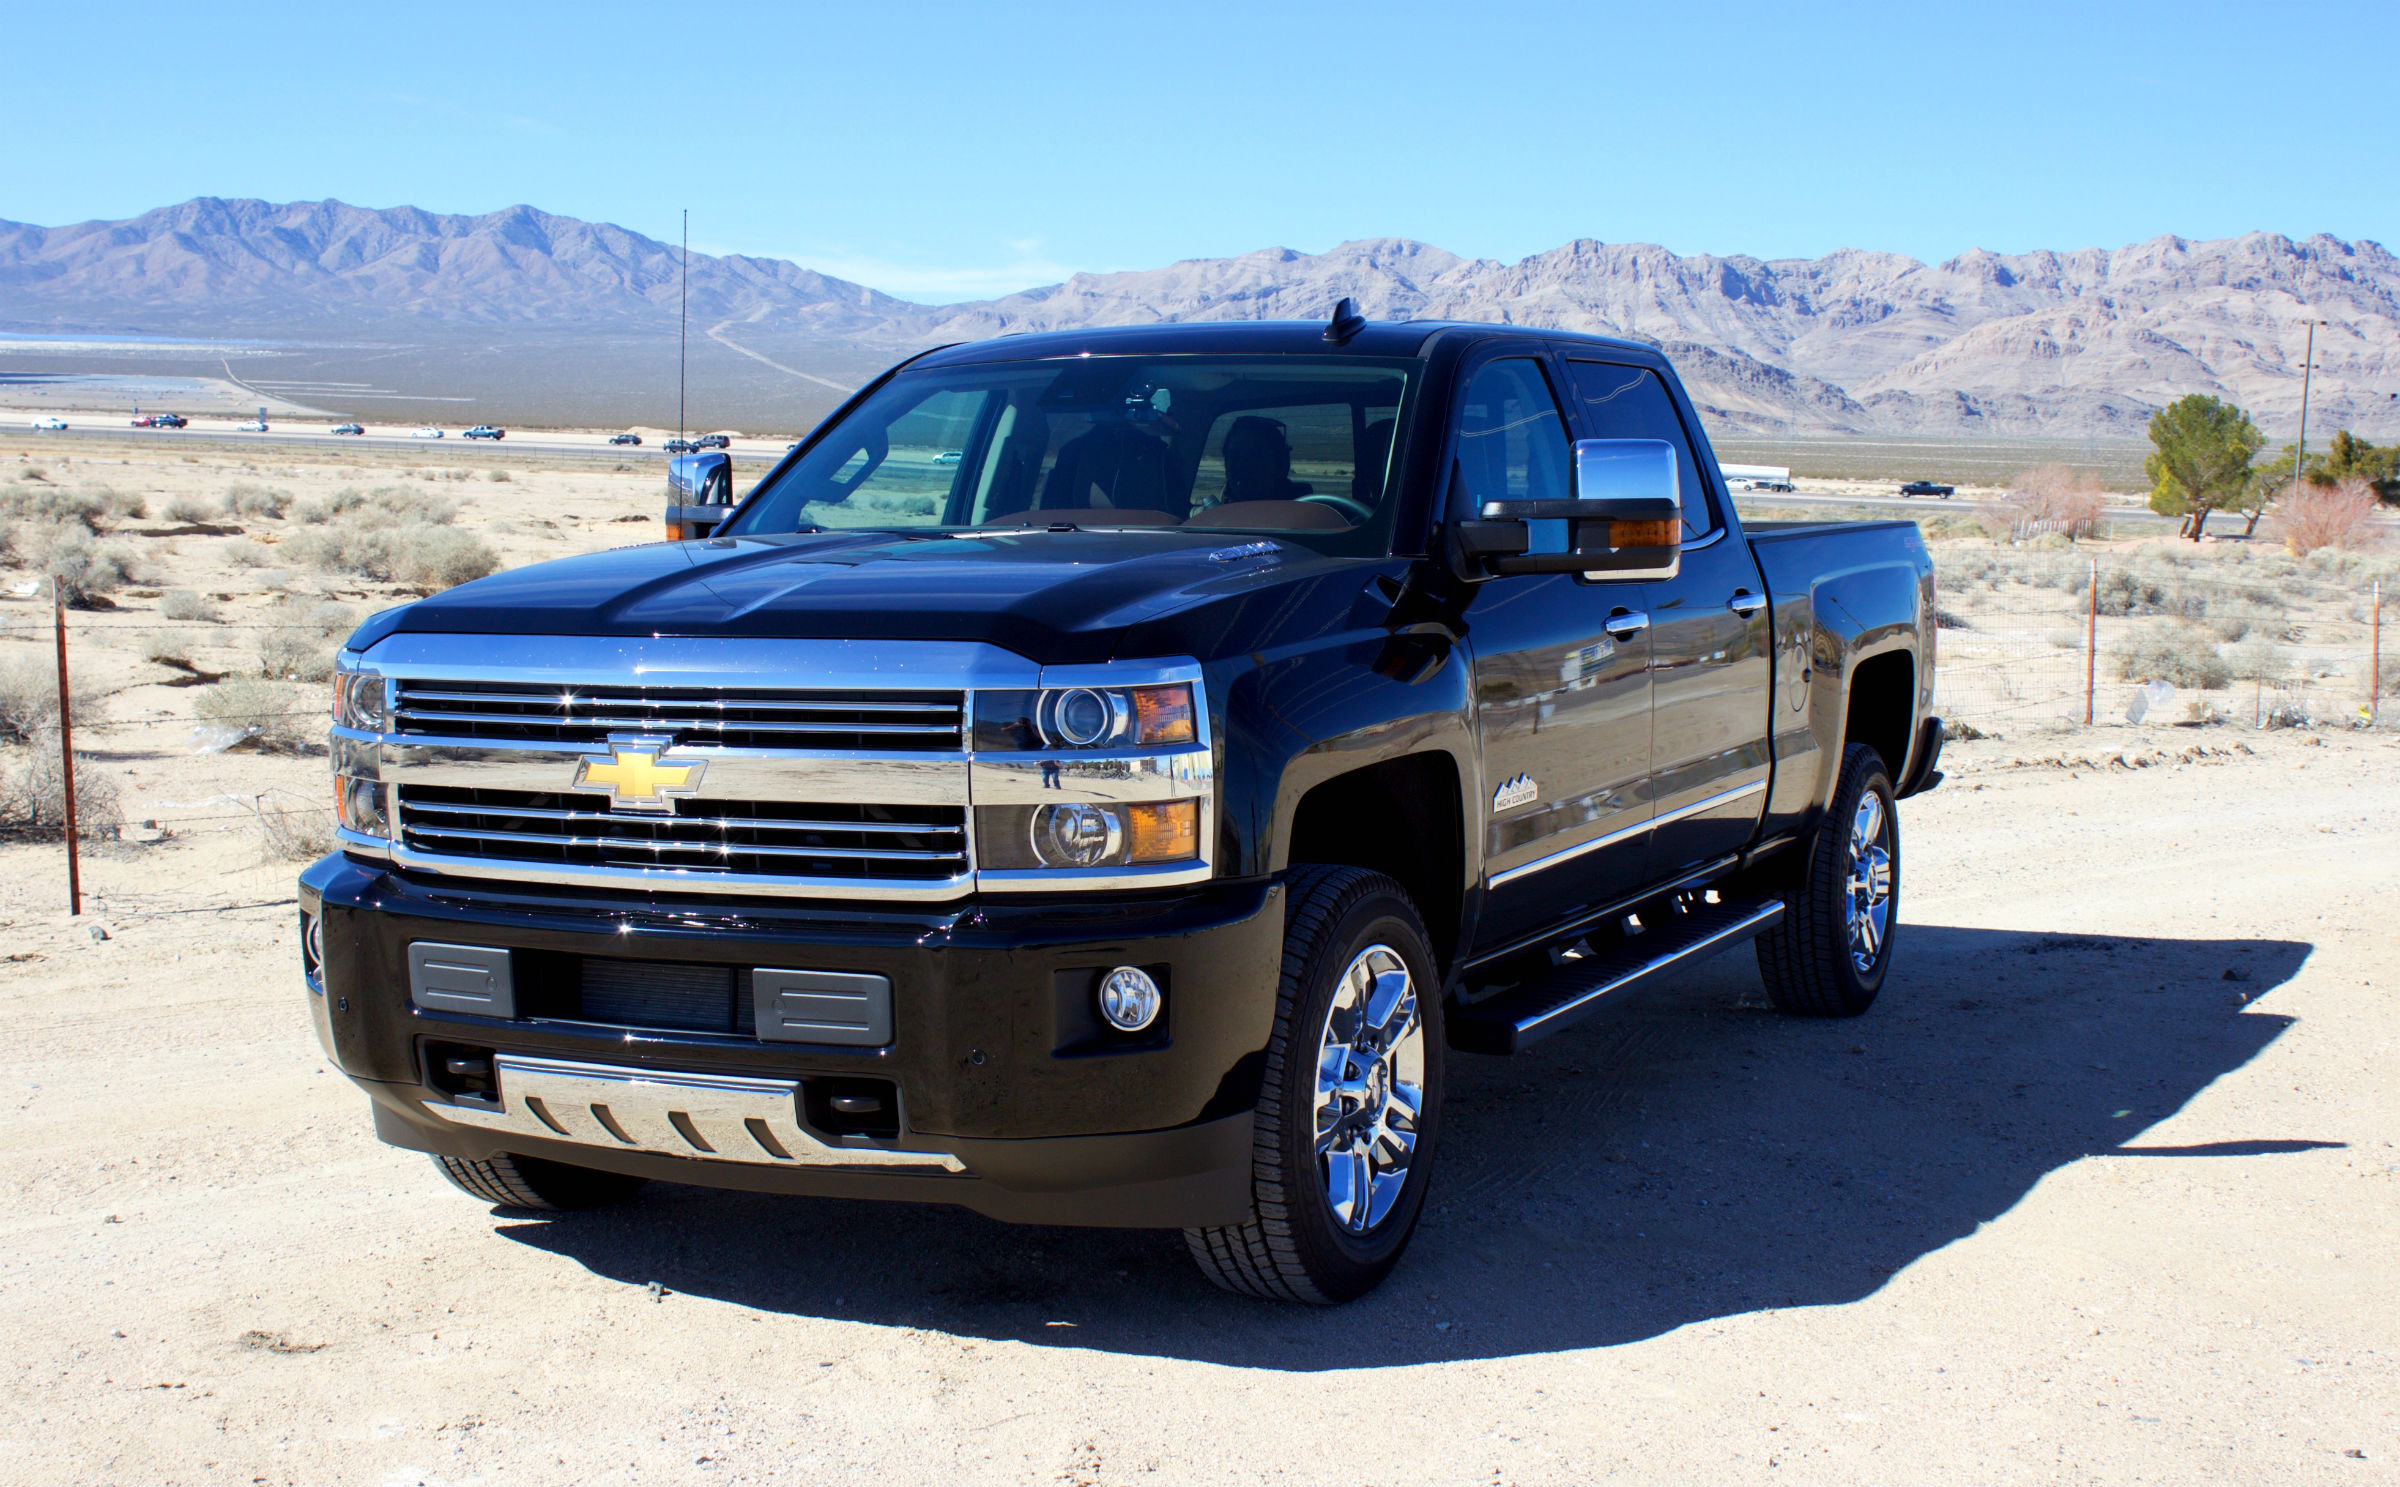 2016 Chevrolet Silverado 2500hd High Country Review The